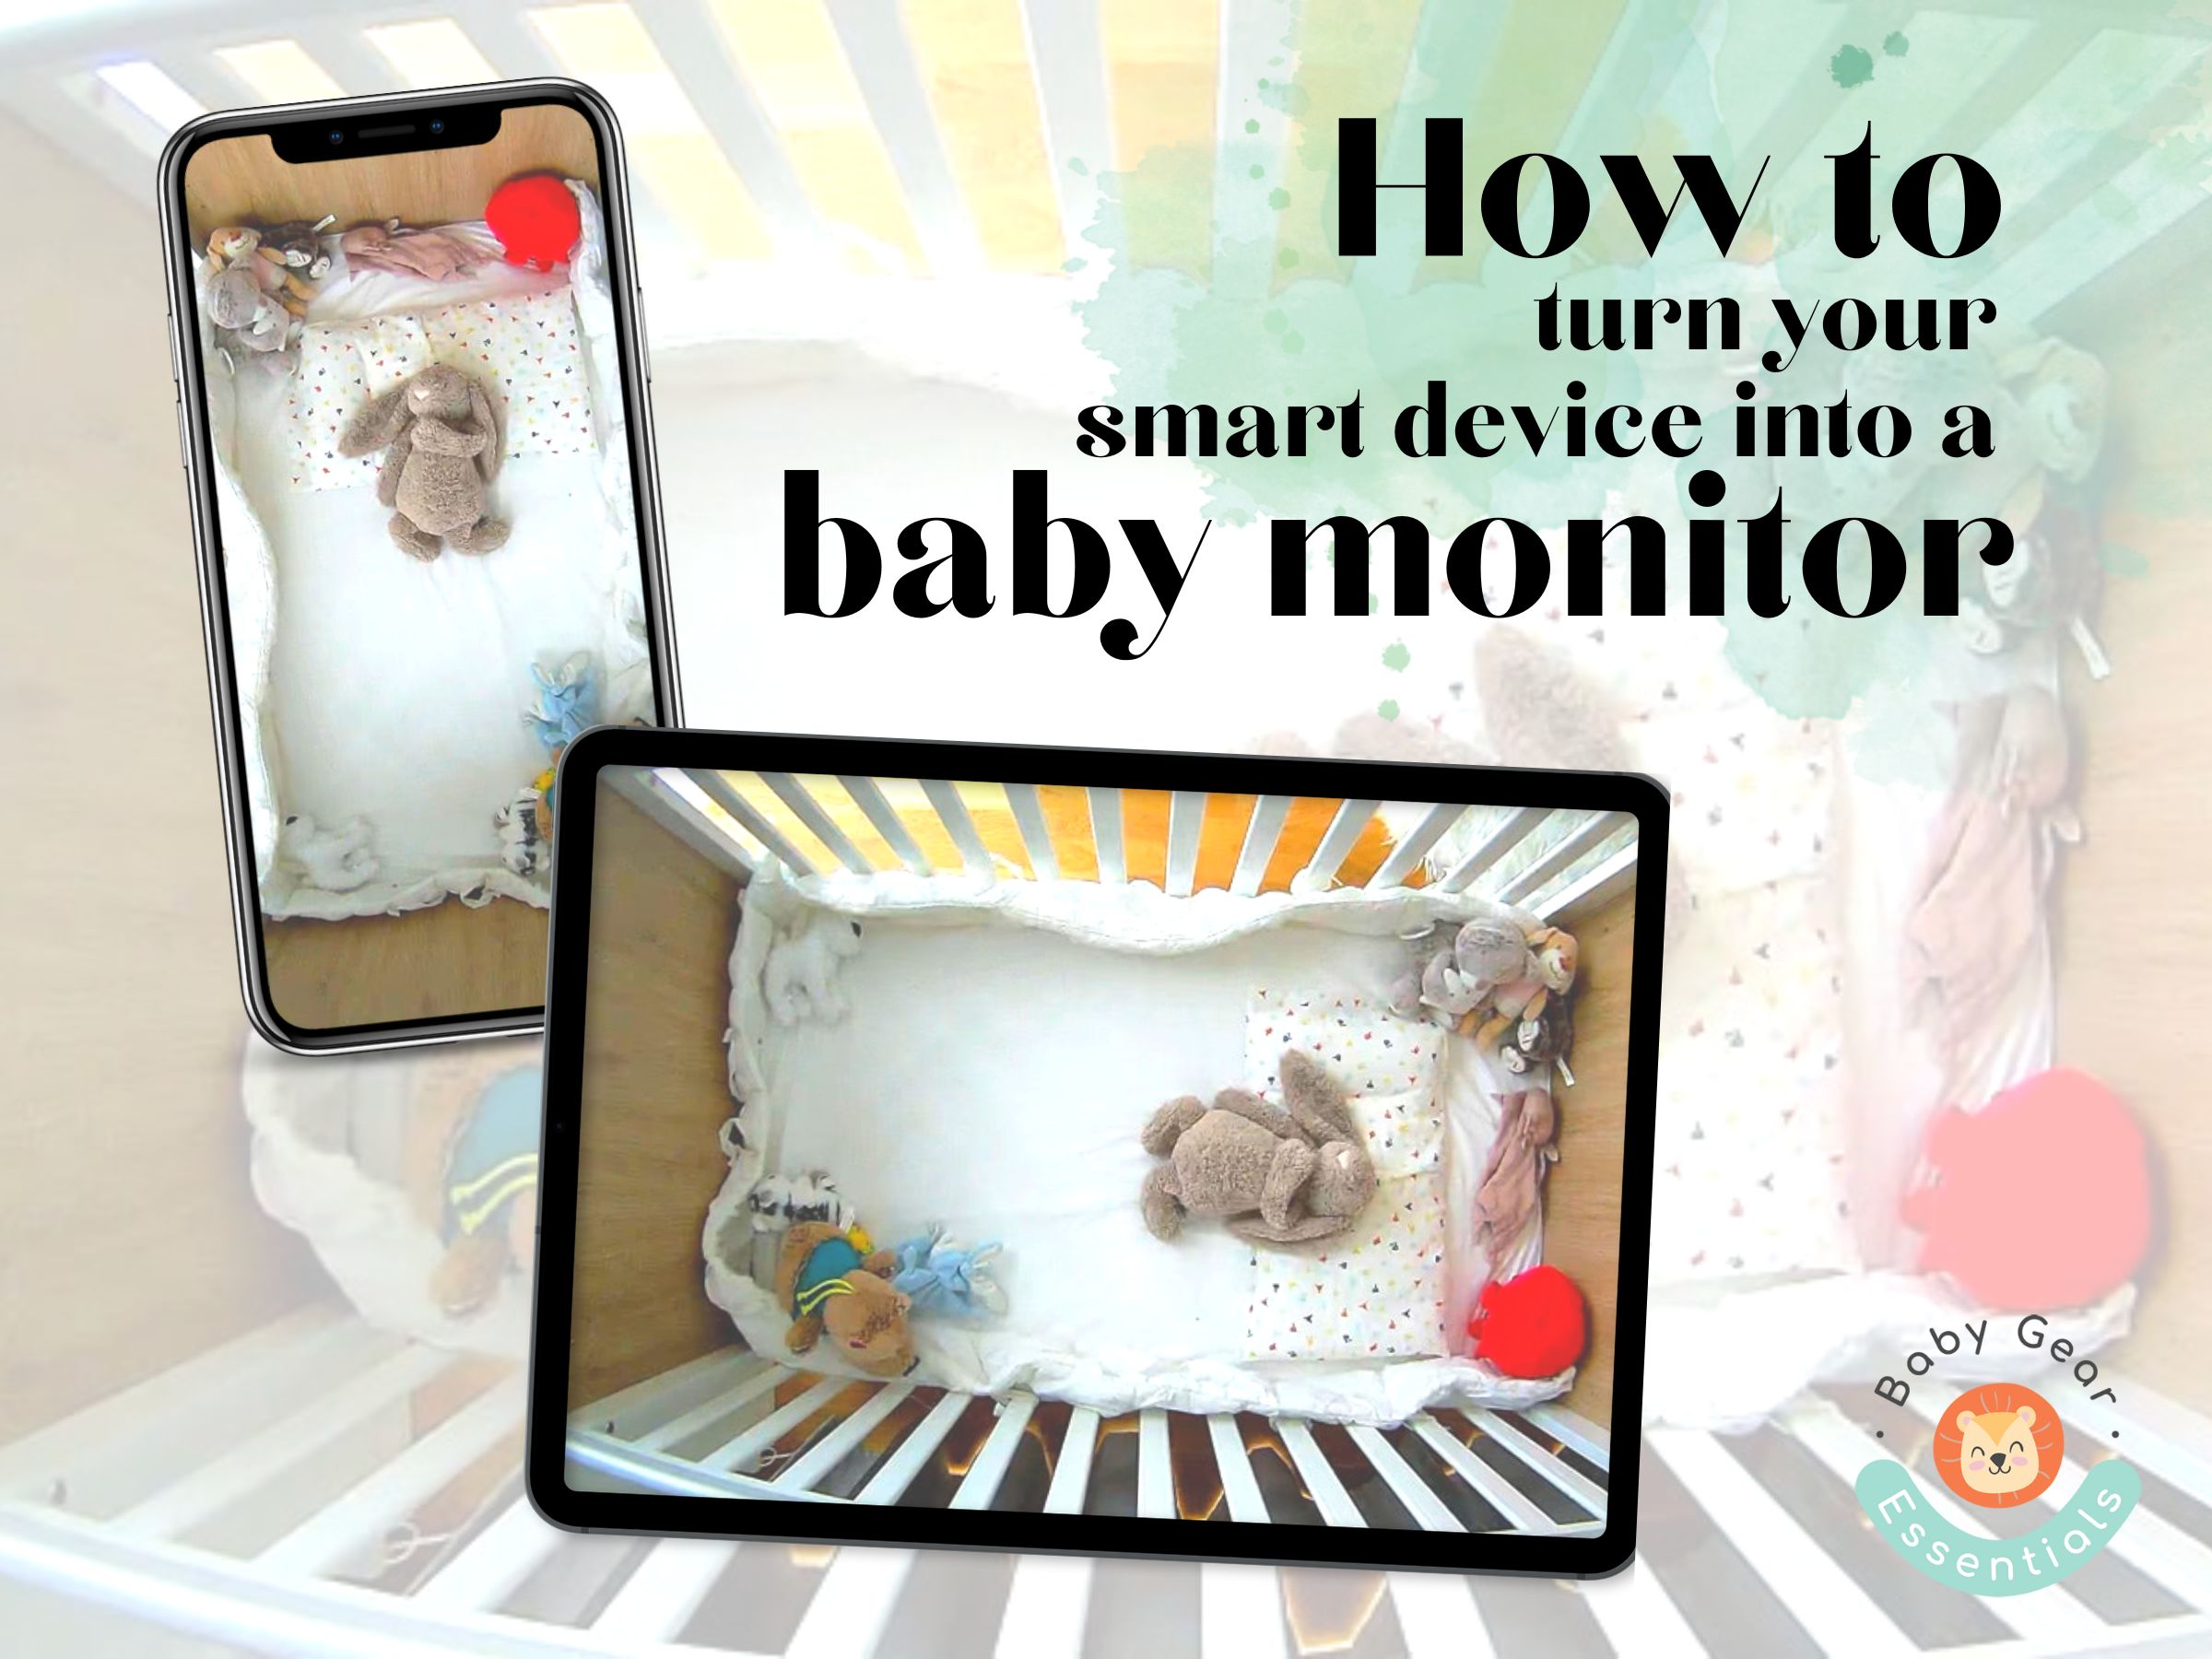 Phone into Baby Monitor